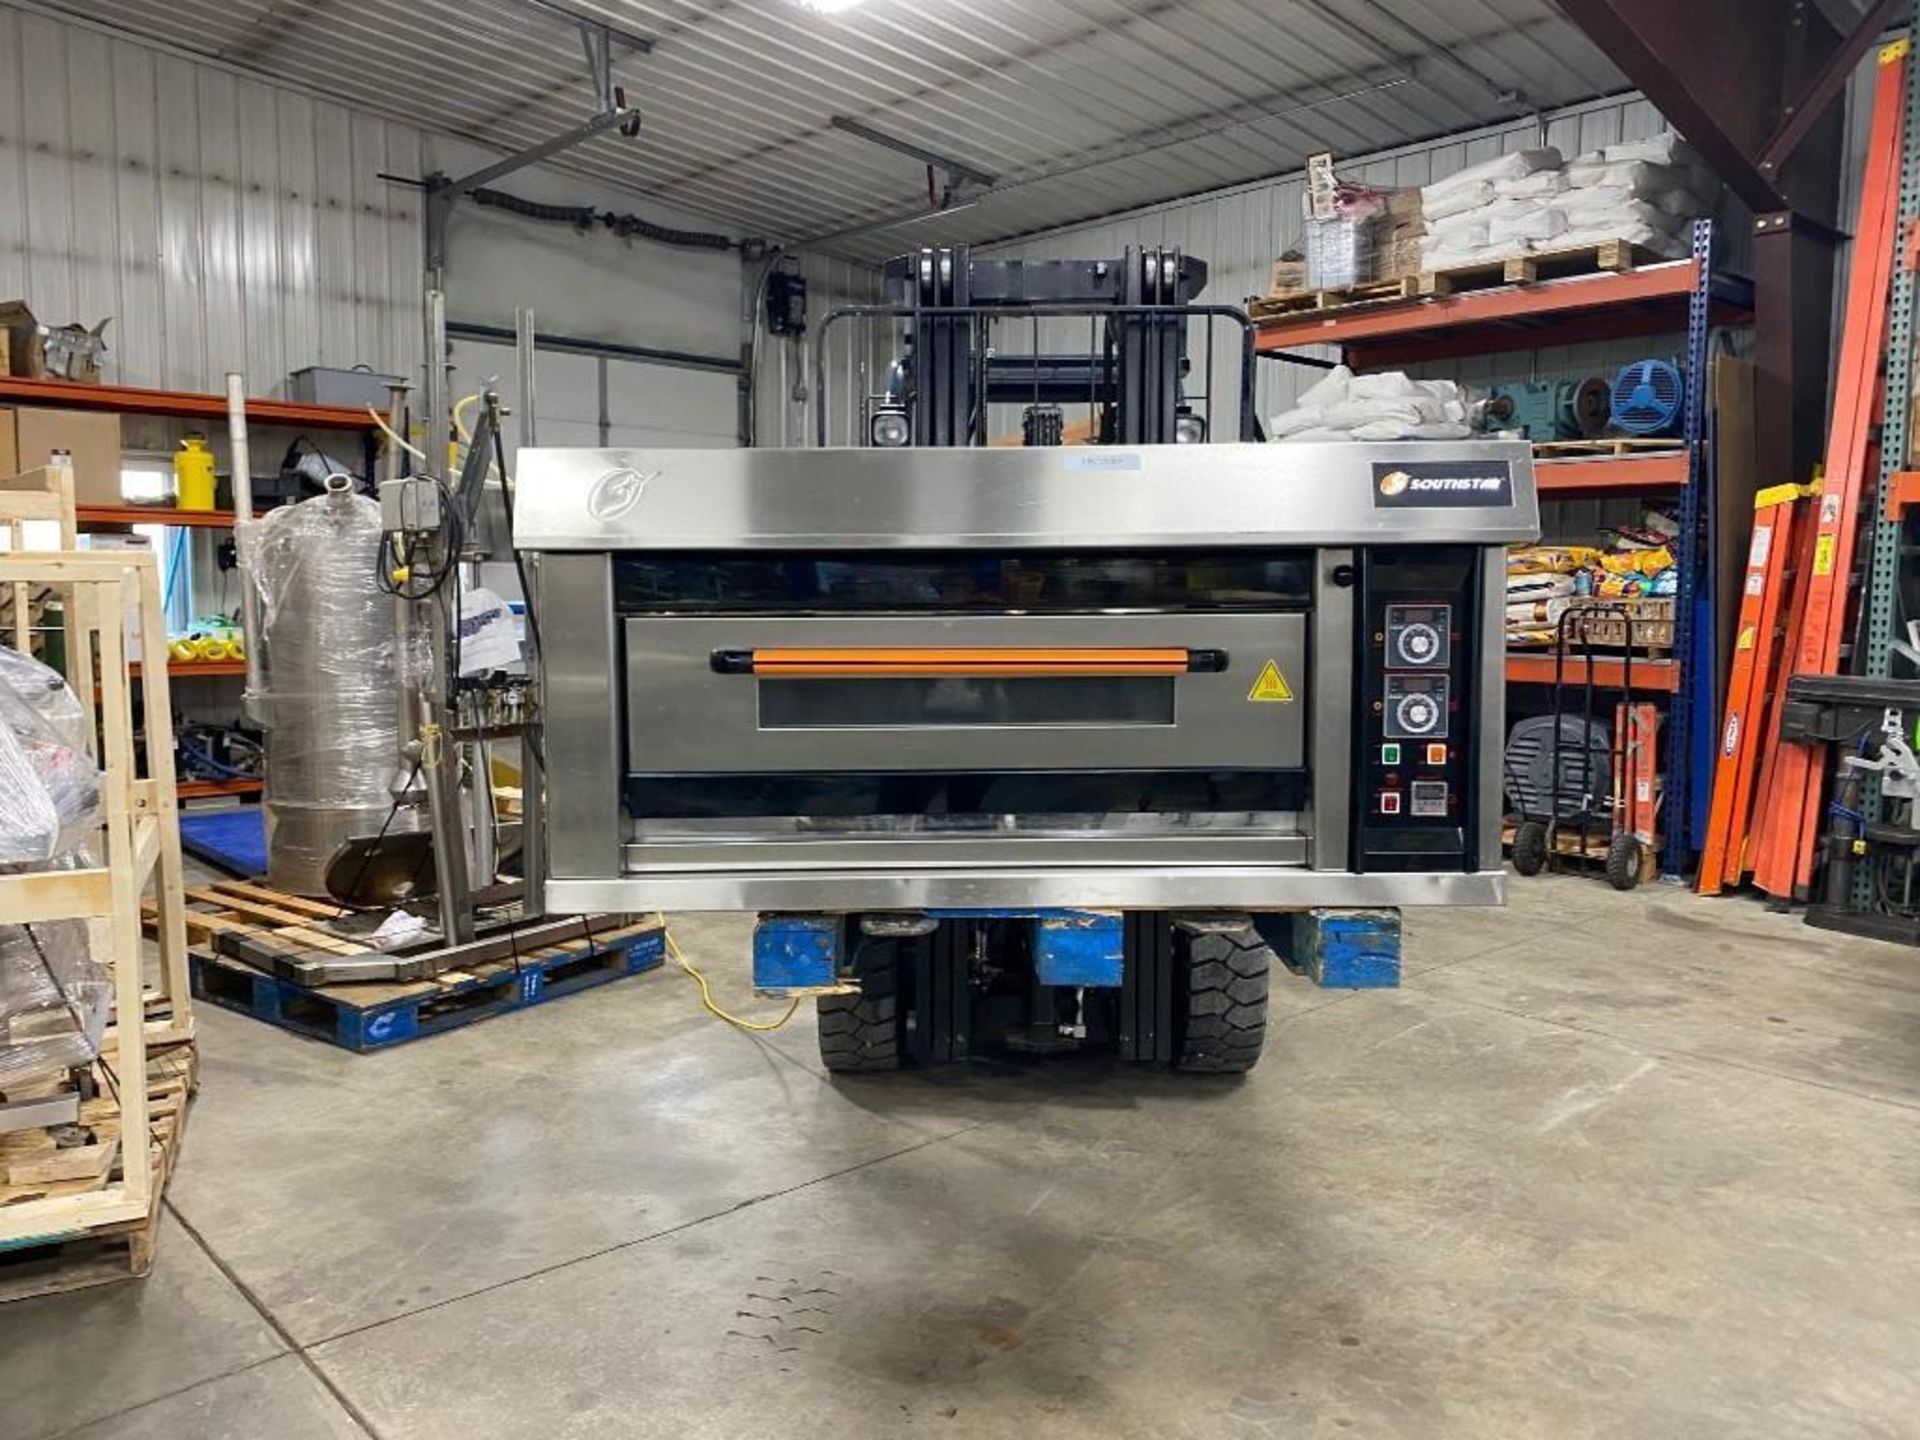 2019 Southstar Luxury Gas Deck Oven